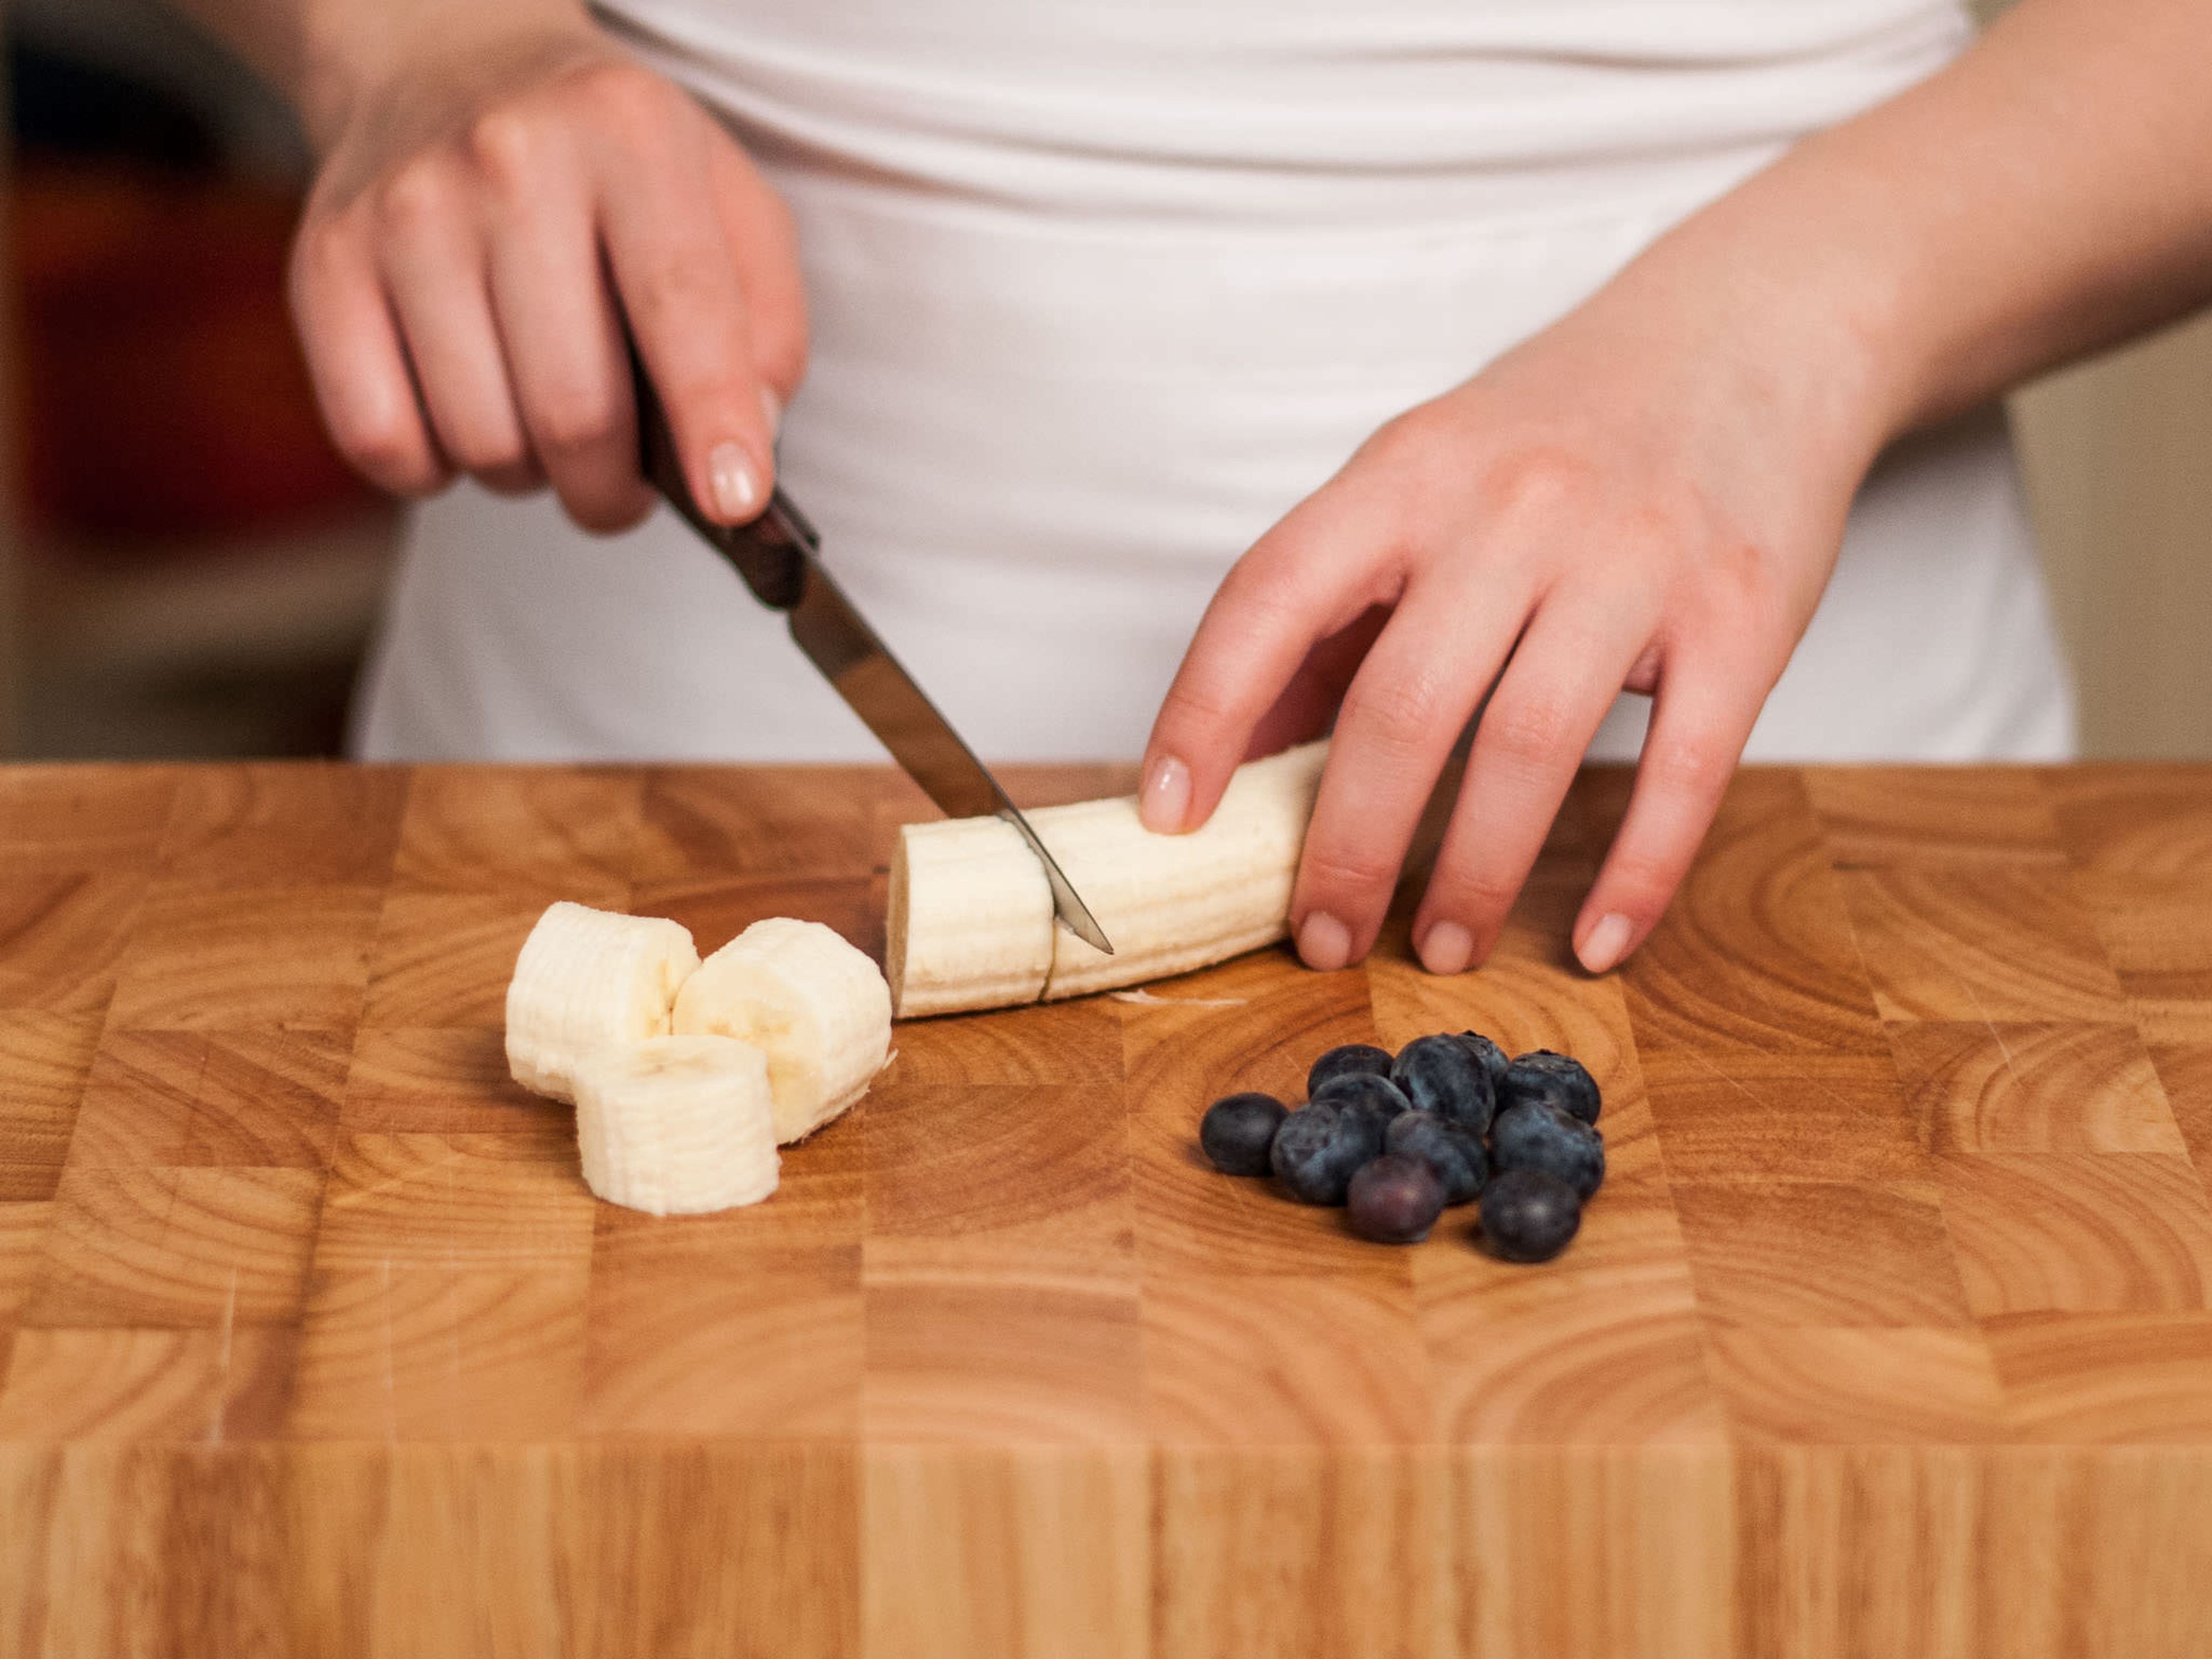 Peel bananas, cut into bite-sized pieces, and freeze with blueberries for at least 5 hours or overnight.